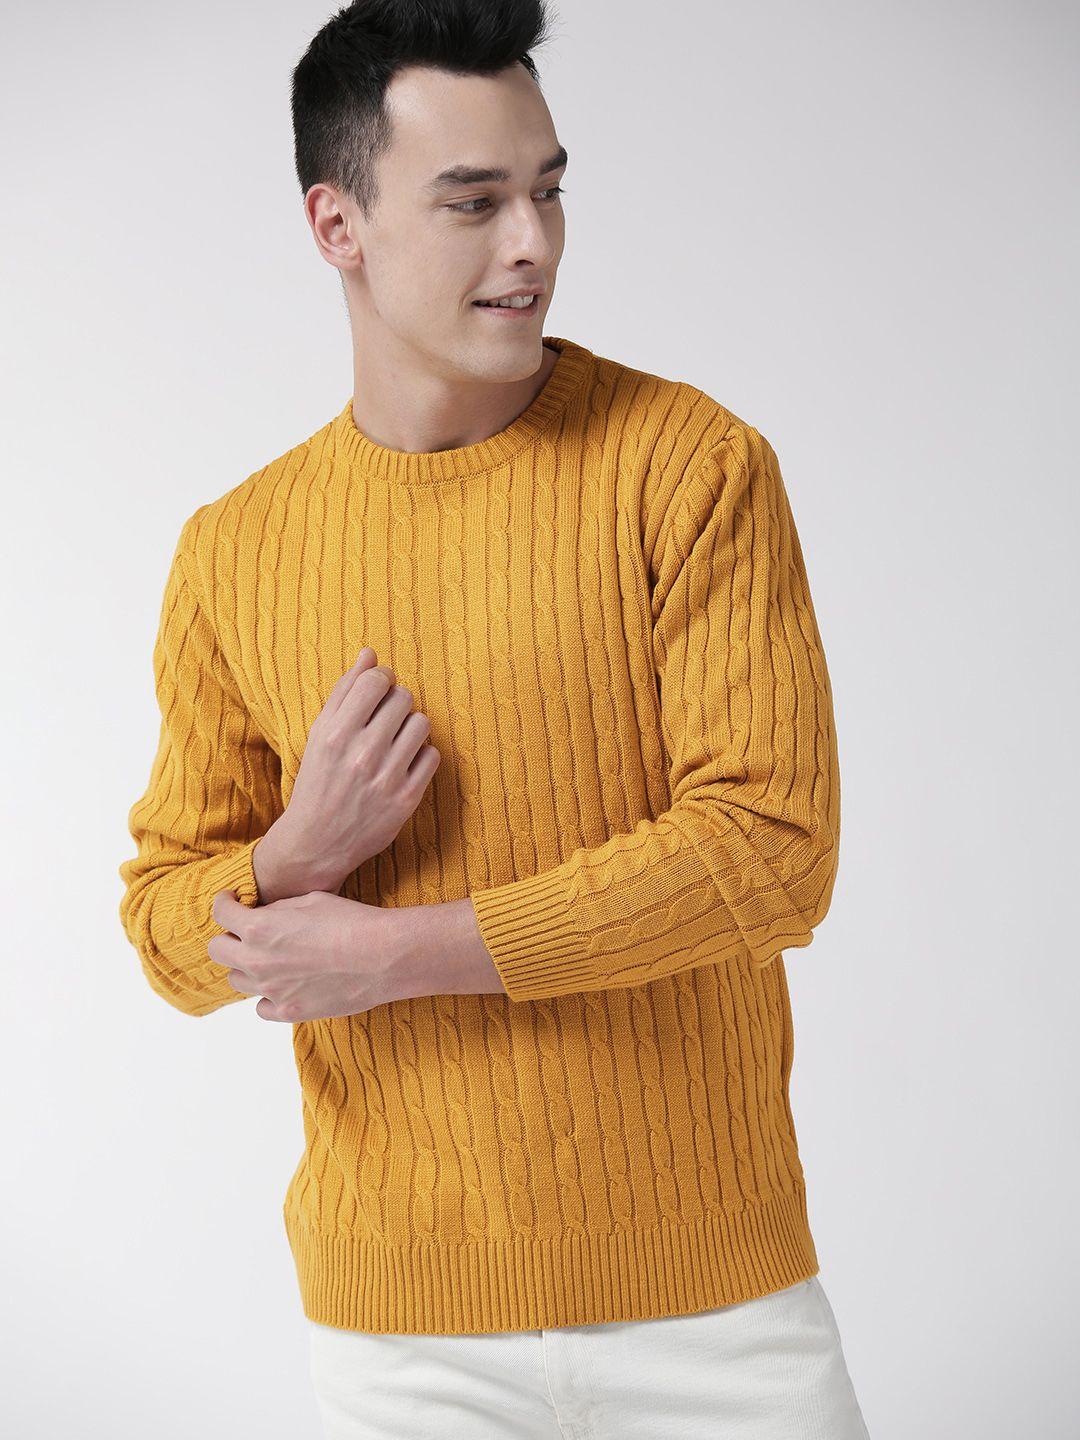 mast-&-harbour-men-mustard-yellow-cable-knit-sweater